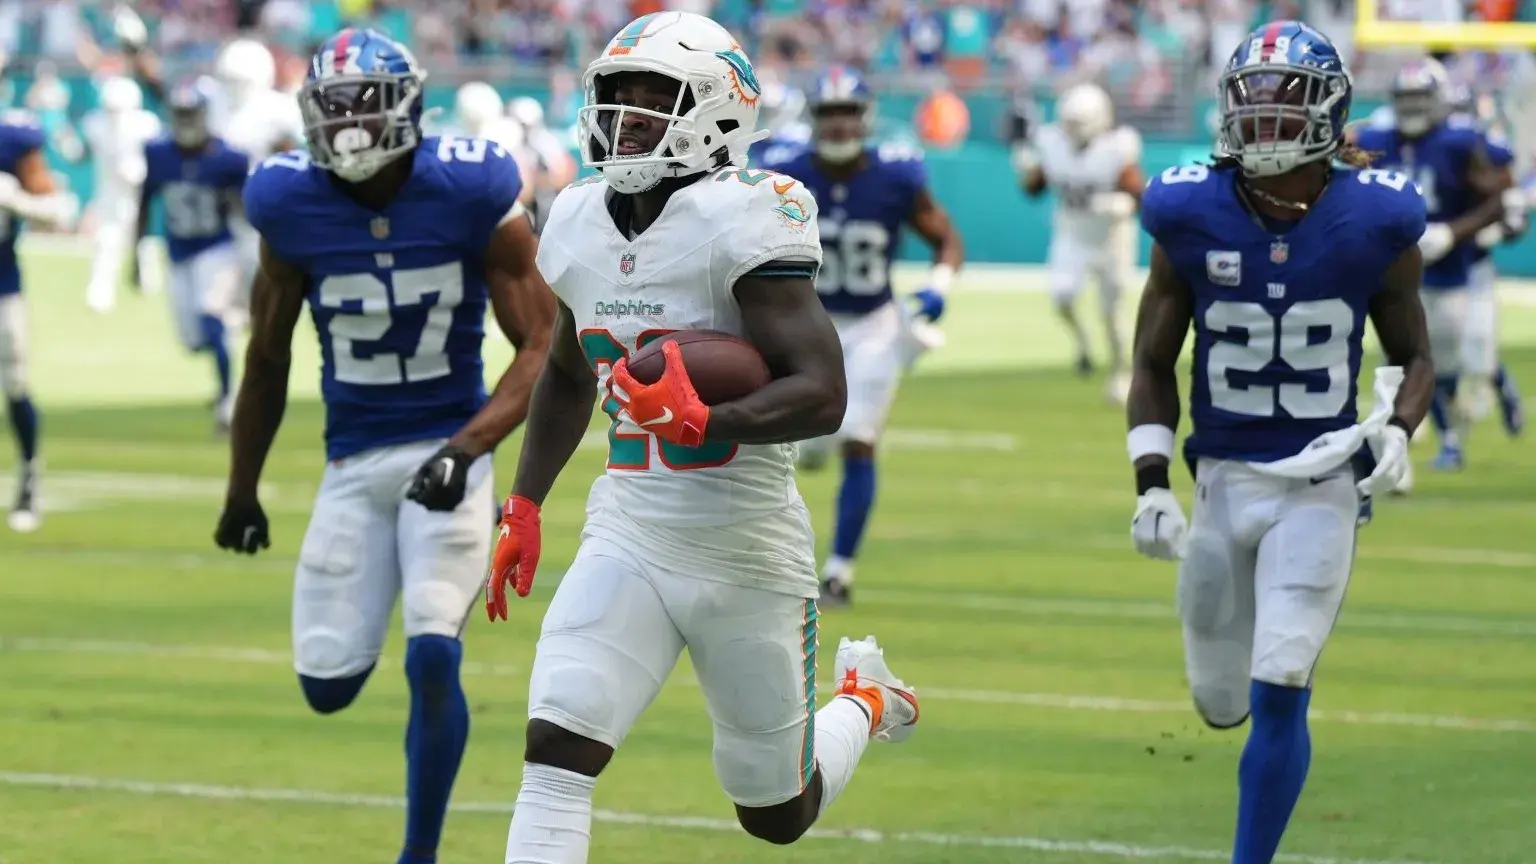 Miami Dolphins running back De'Von Achane (28) breaks free for a 76-yard touchdown run against the New York Giants during the first half of an NFL game at Hard Rock Stadium in Miami Gardens, October 8, 2023. / Jim Rassol / USA TODAY NETWORK